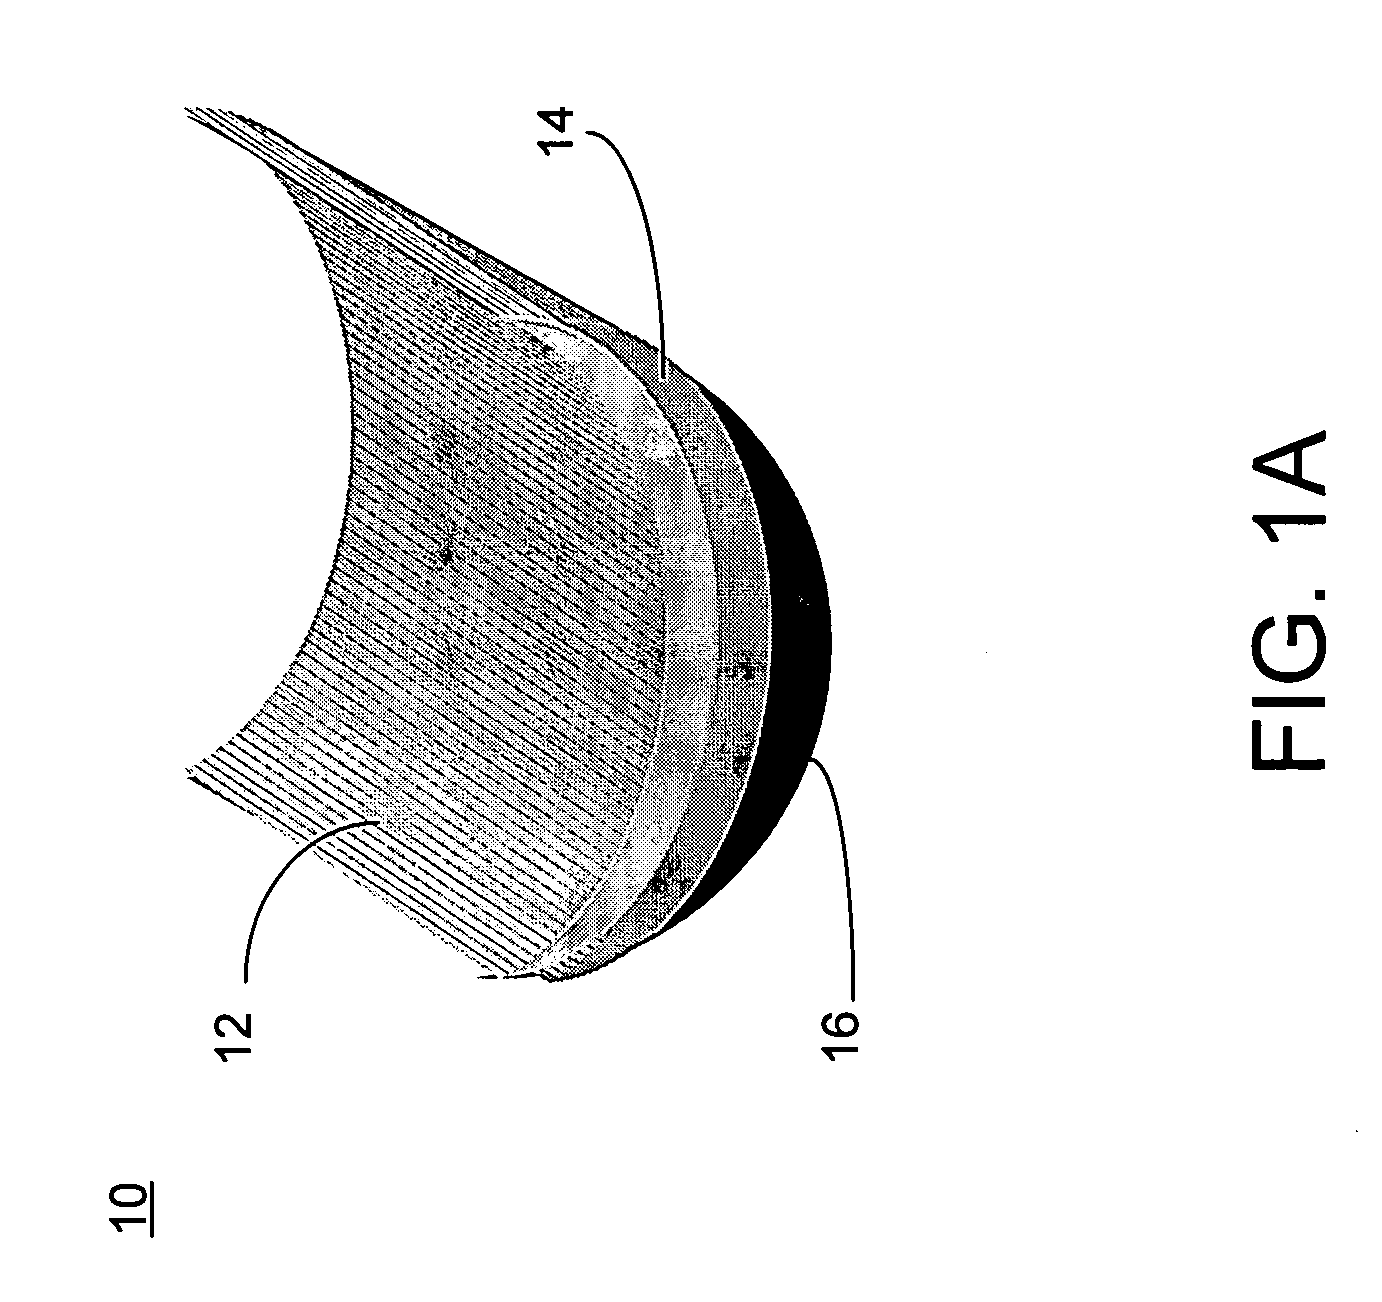 Systems and methods for communications through materials